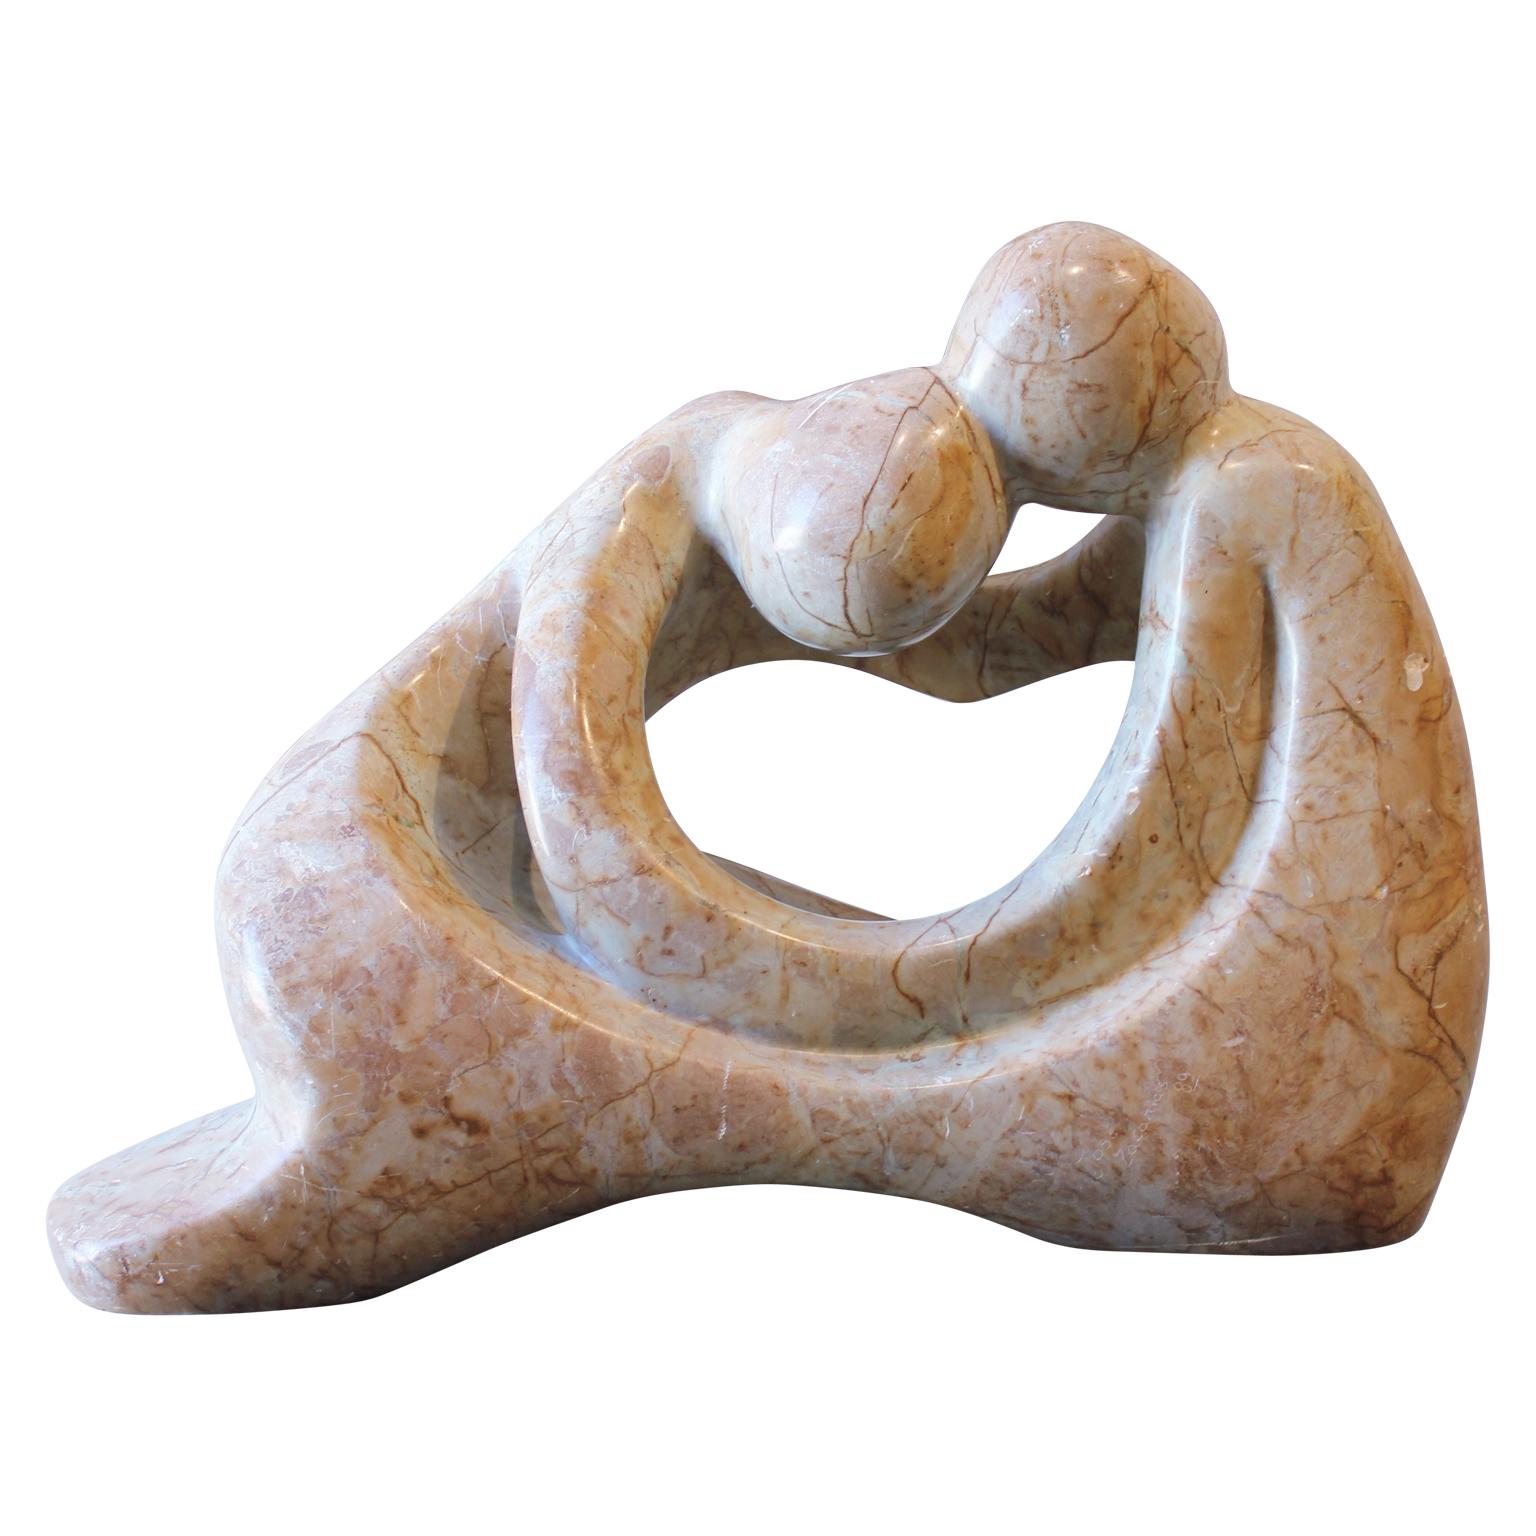 Jose Zacarias Abstract Sculpture - Two Embracing Figures